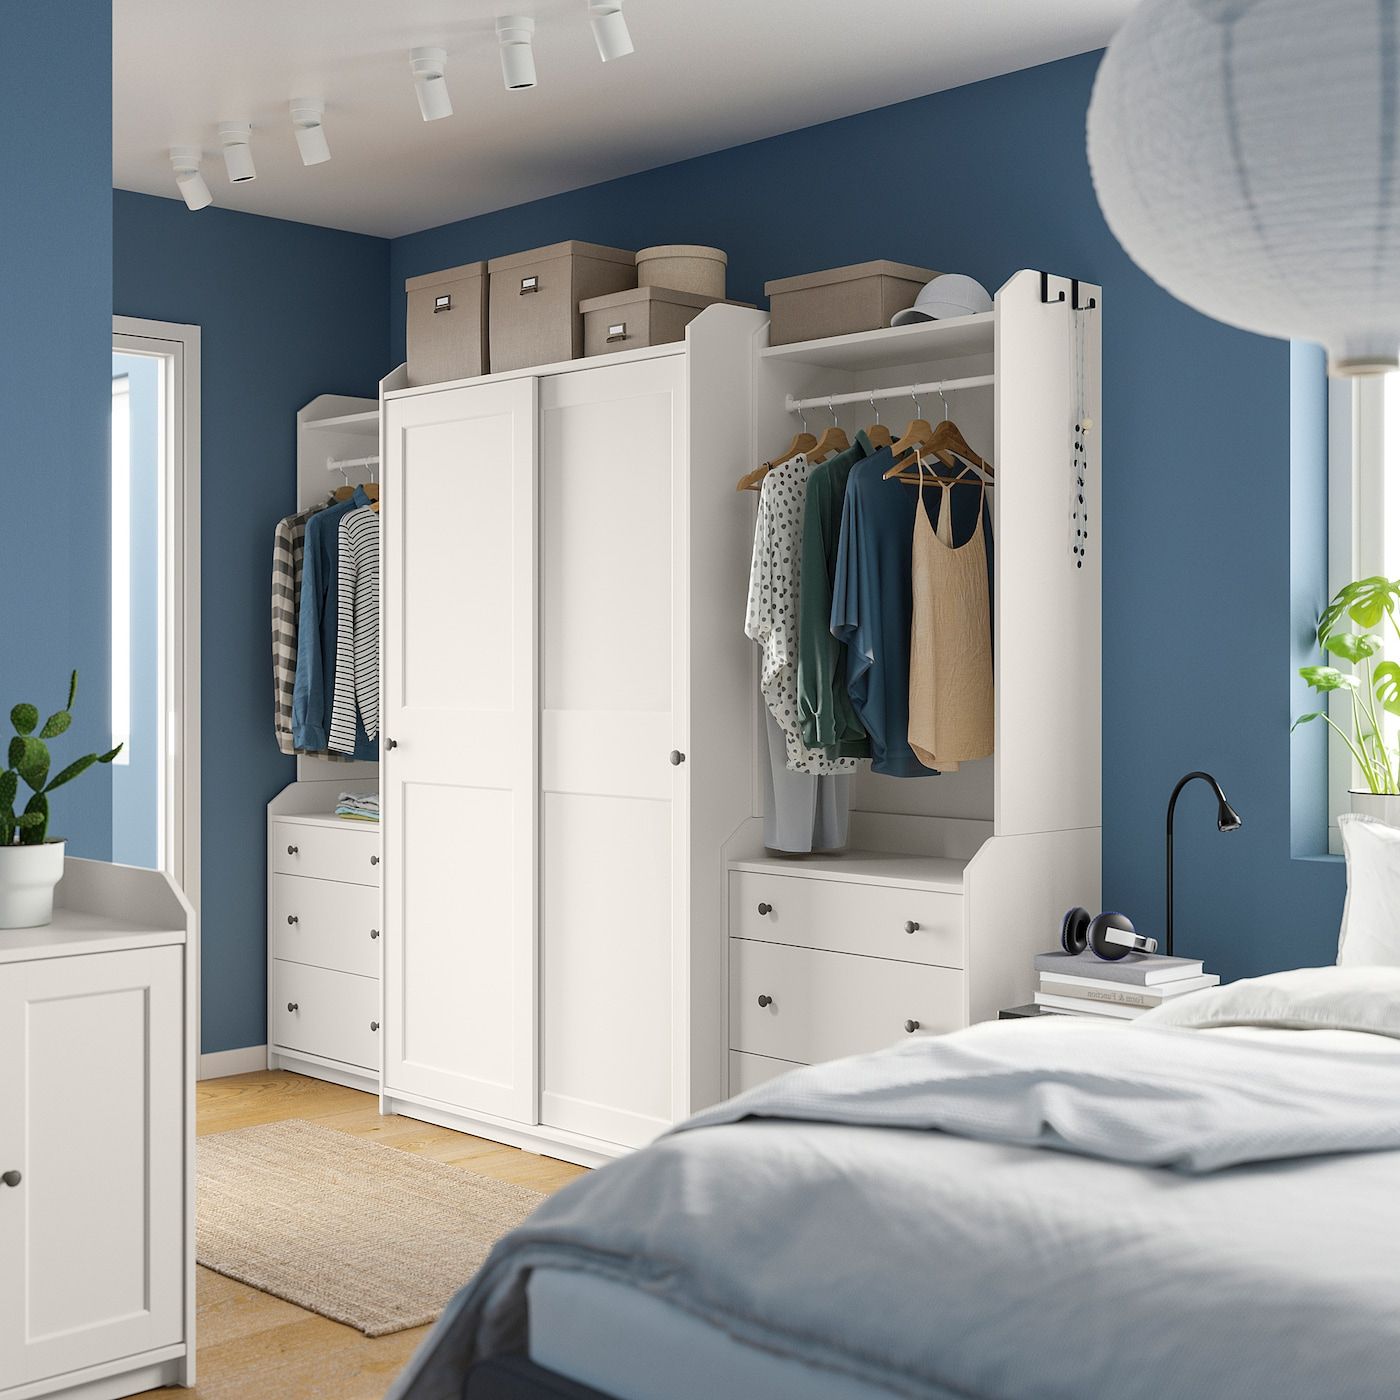 Hauga Wardrobe Combination, White, 1015/8x215/8x783/8" – Ikea Within Wardrobes Chest Of Drawers Combination (Gallery 1 of 20)